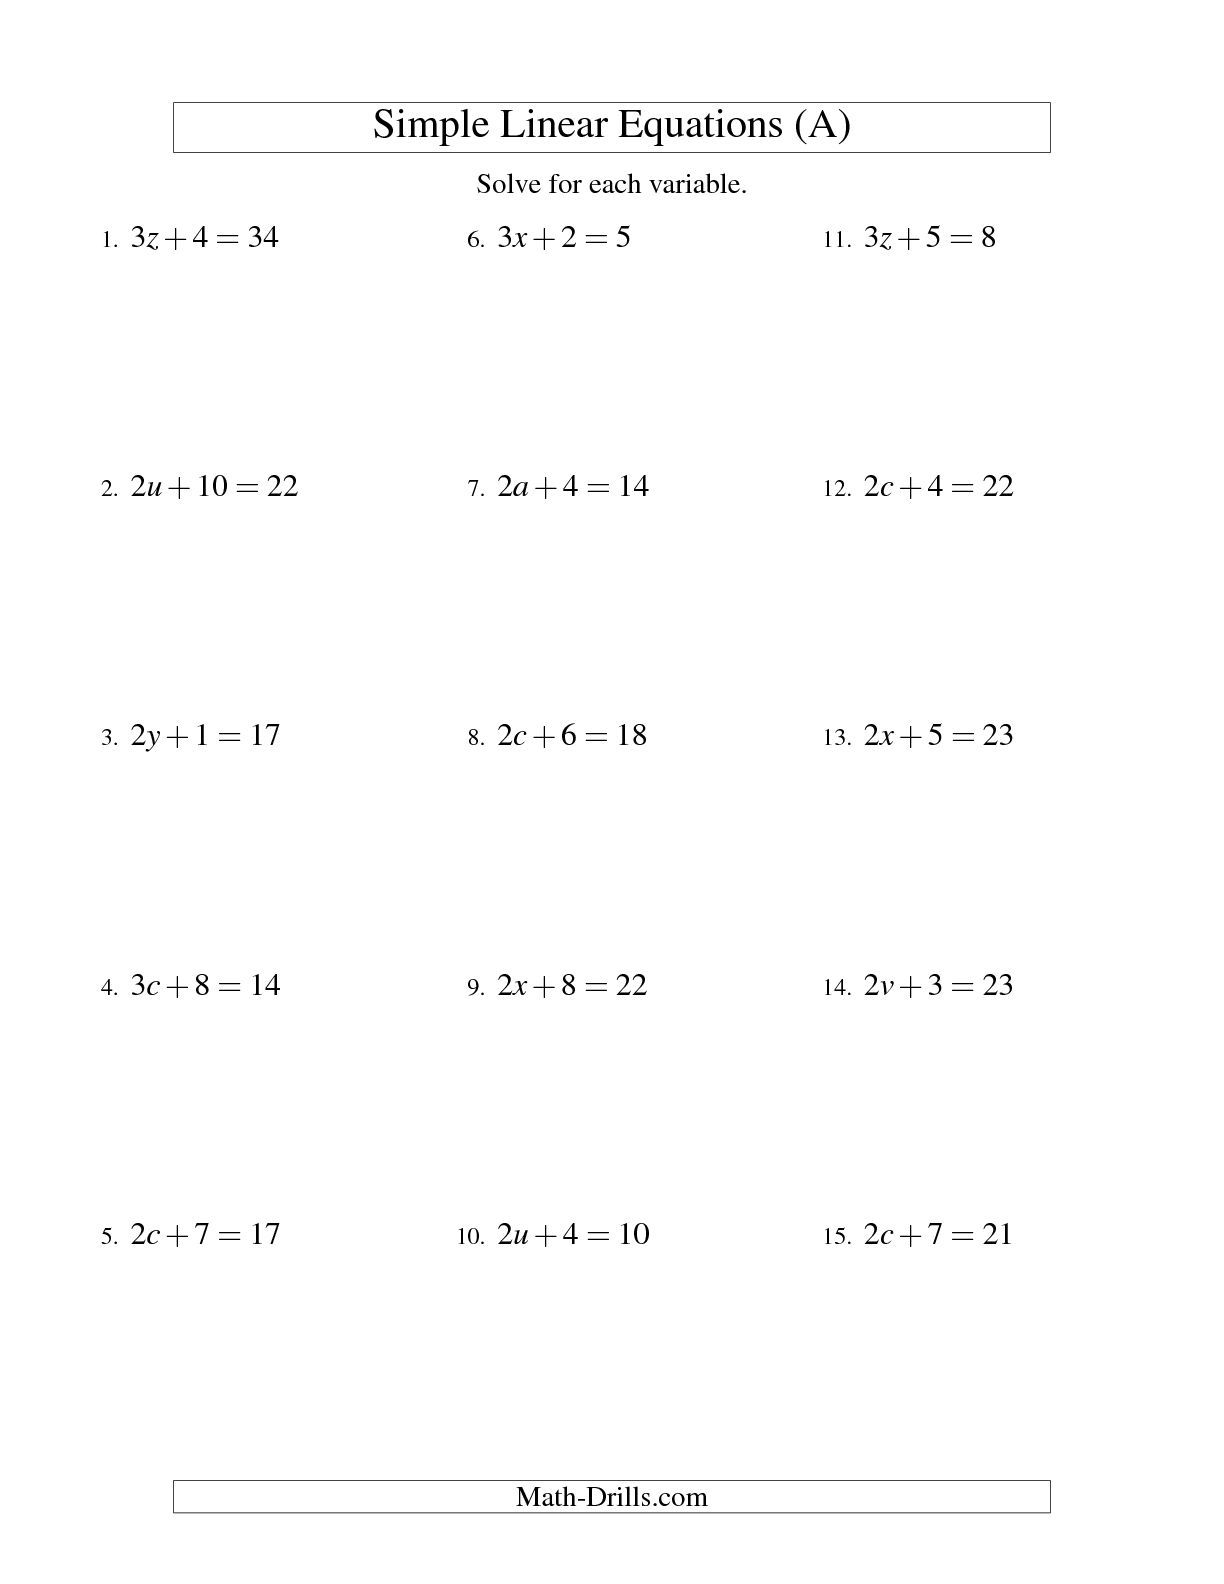 The Solving Linear Equations Form ax + b = c (A) math worksheet from